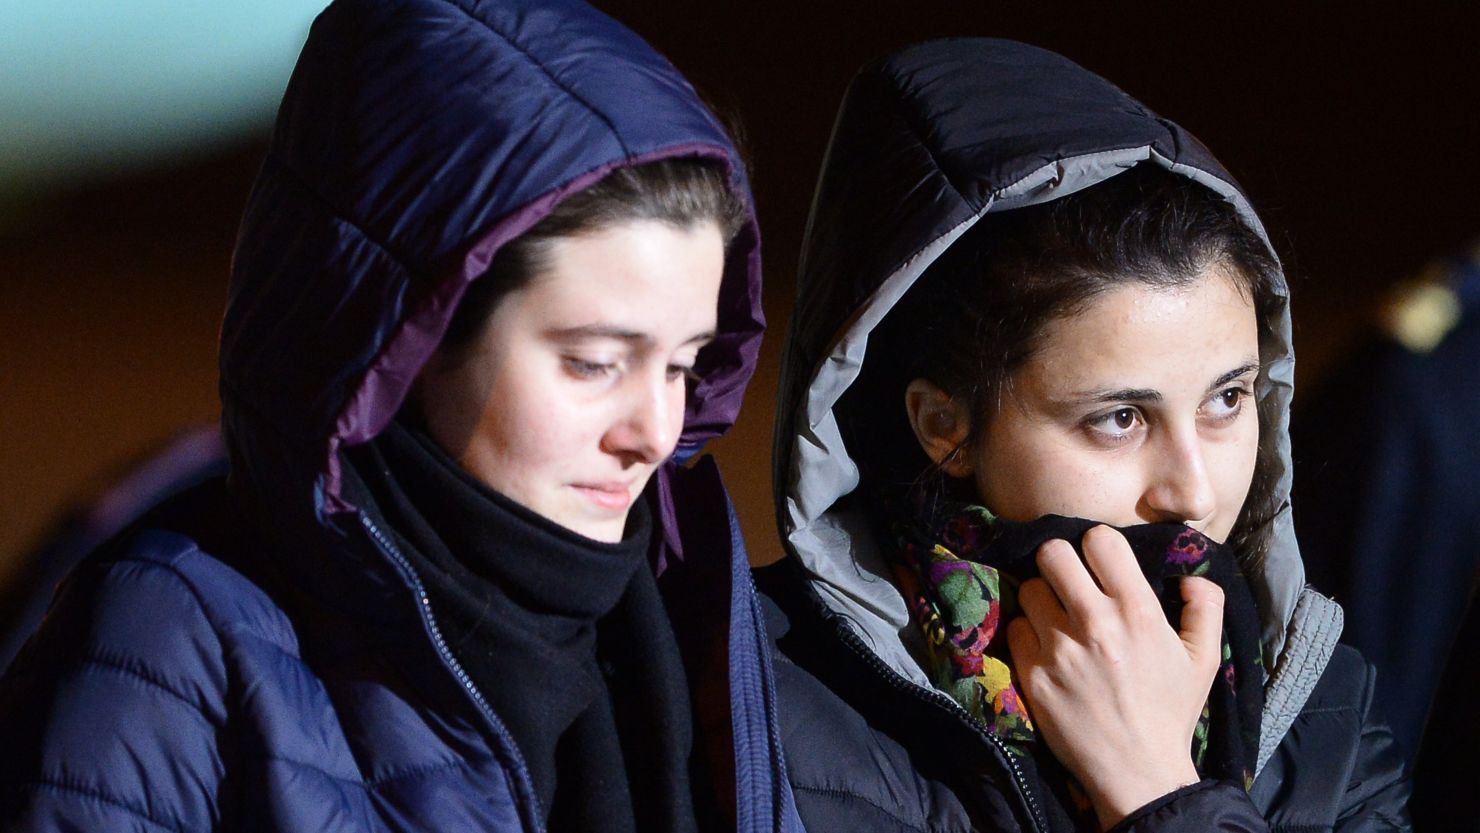 Italian aid workers abducted in Syria, Greta Ramelli and Vanessa Marzullo, arrive in Rome on January 16, 2015.